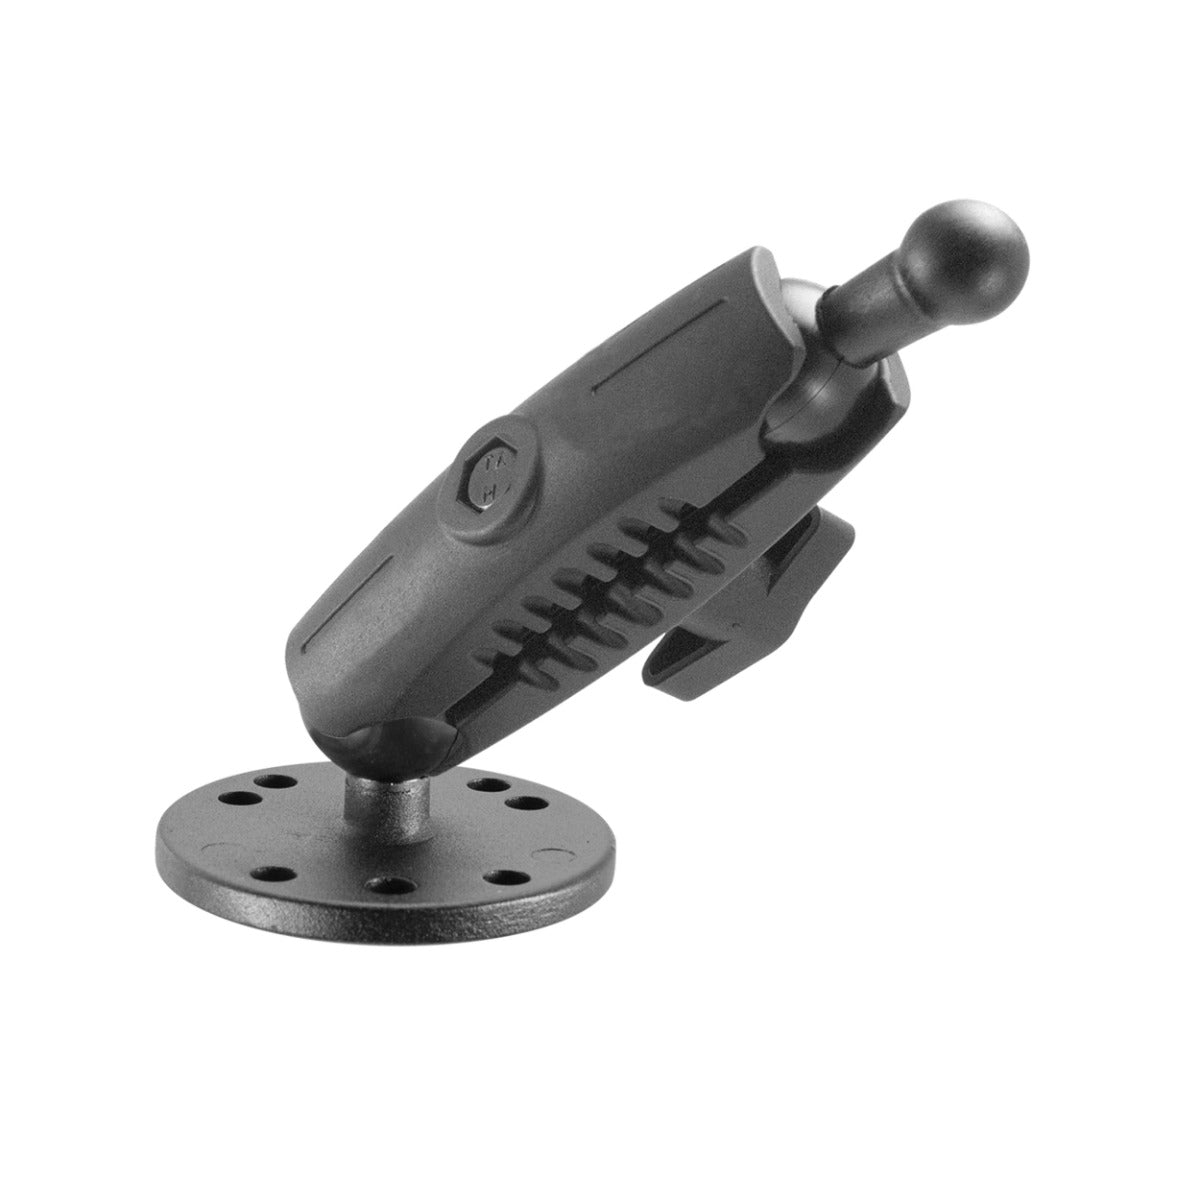 iBOLT 17mm Dual Ball to Round Metal AMPs Drill Base Mount for Garmin GPS and iBOLT Phone Holders